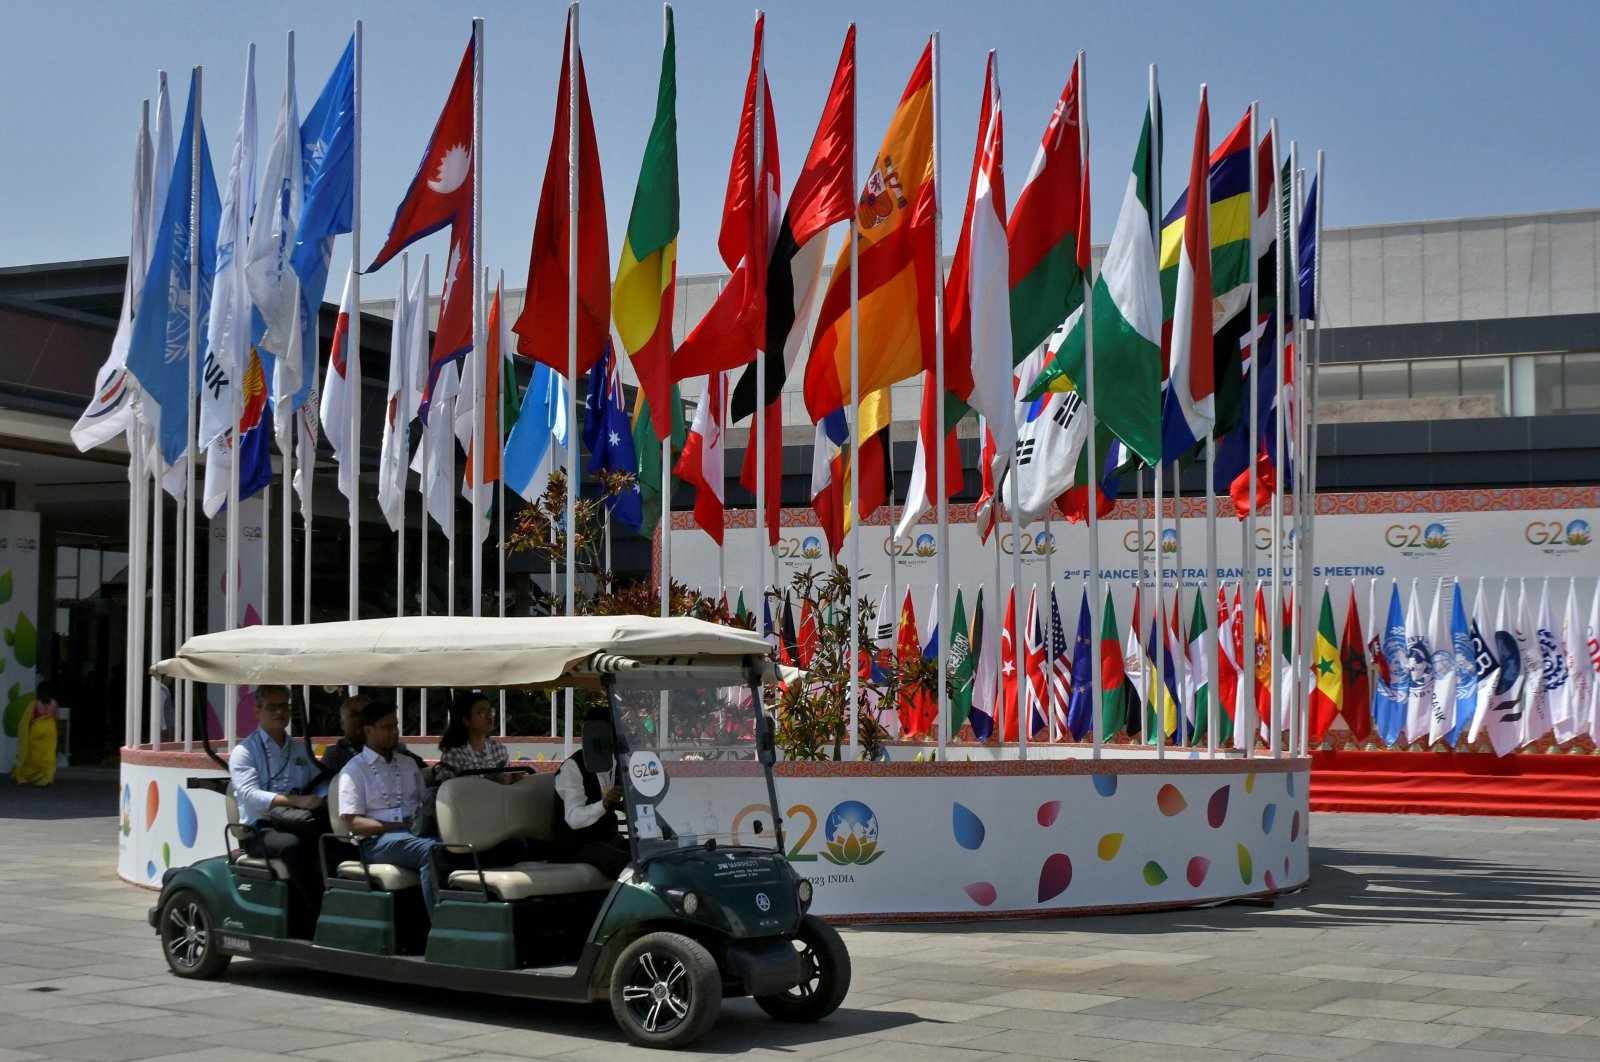 Delegates ride in a buggy at the G-20 finance officials meeting venue near Bengaluru, India, Feb. 22, 2023. (Reuters Photo)